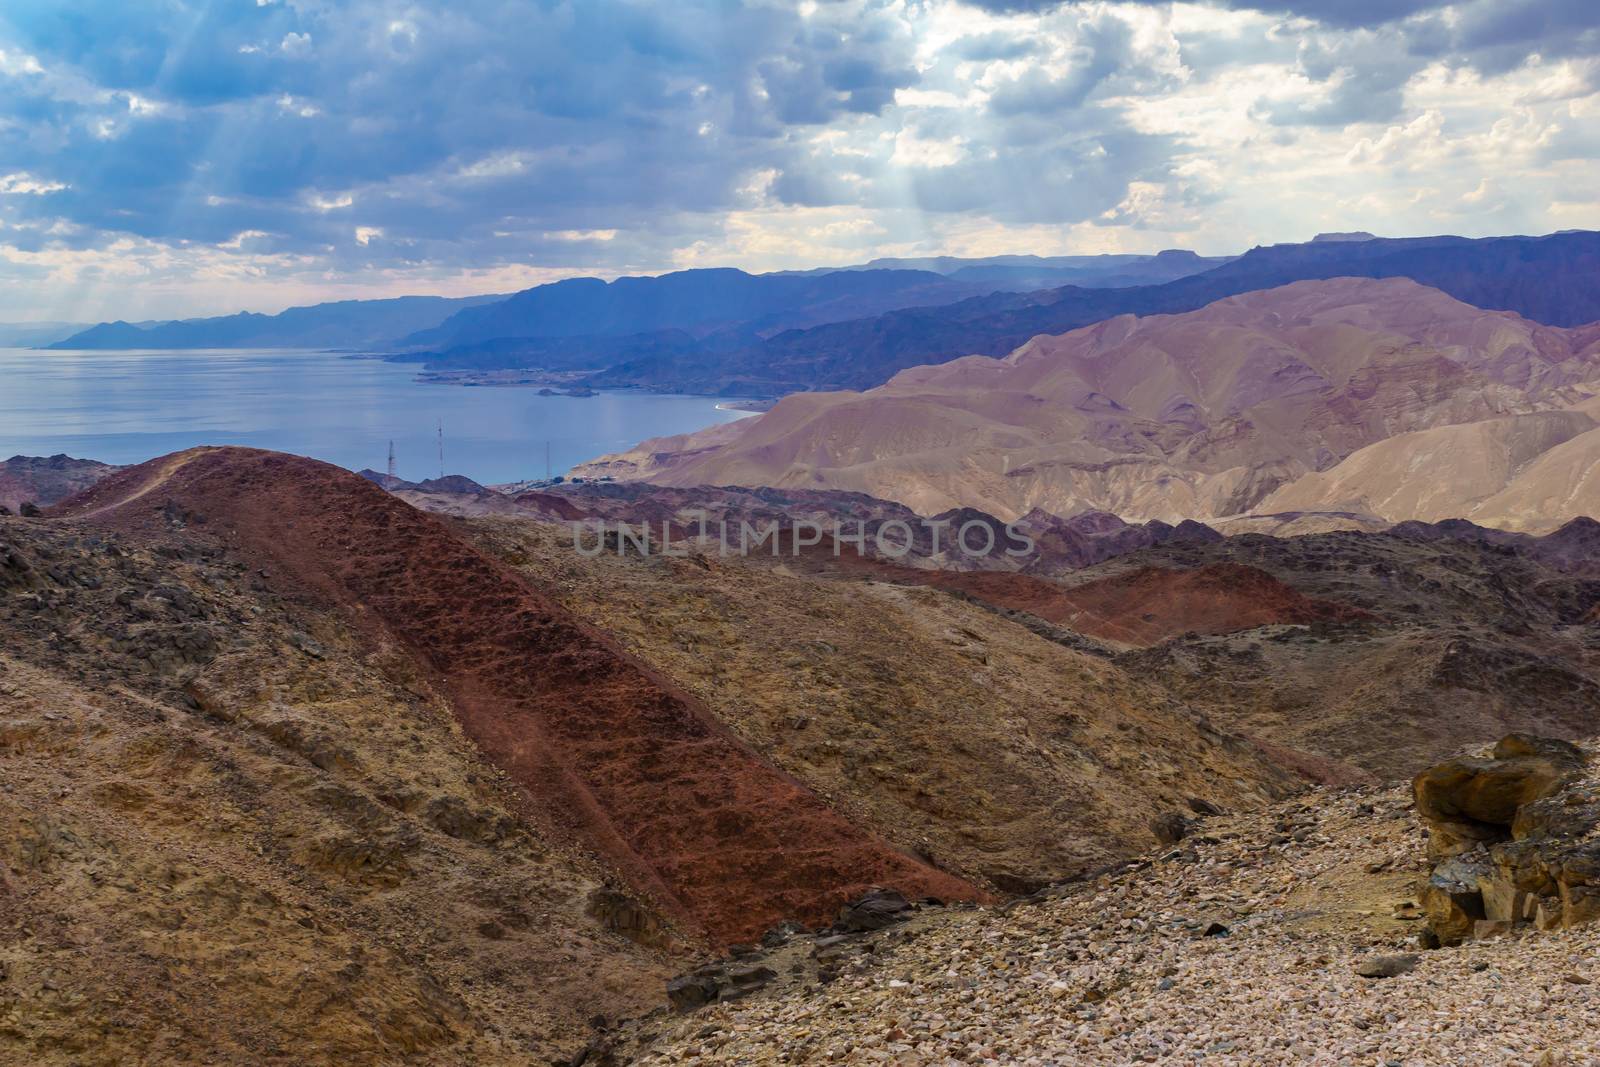 Mount Tzfahot and the gulf of Aqaba by RnDmS